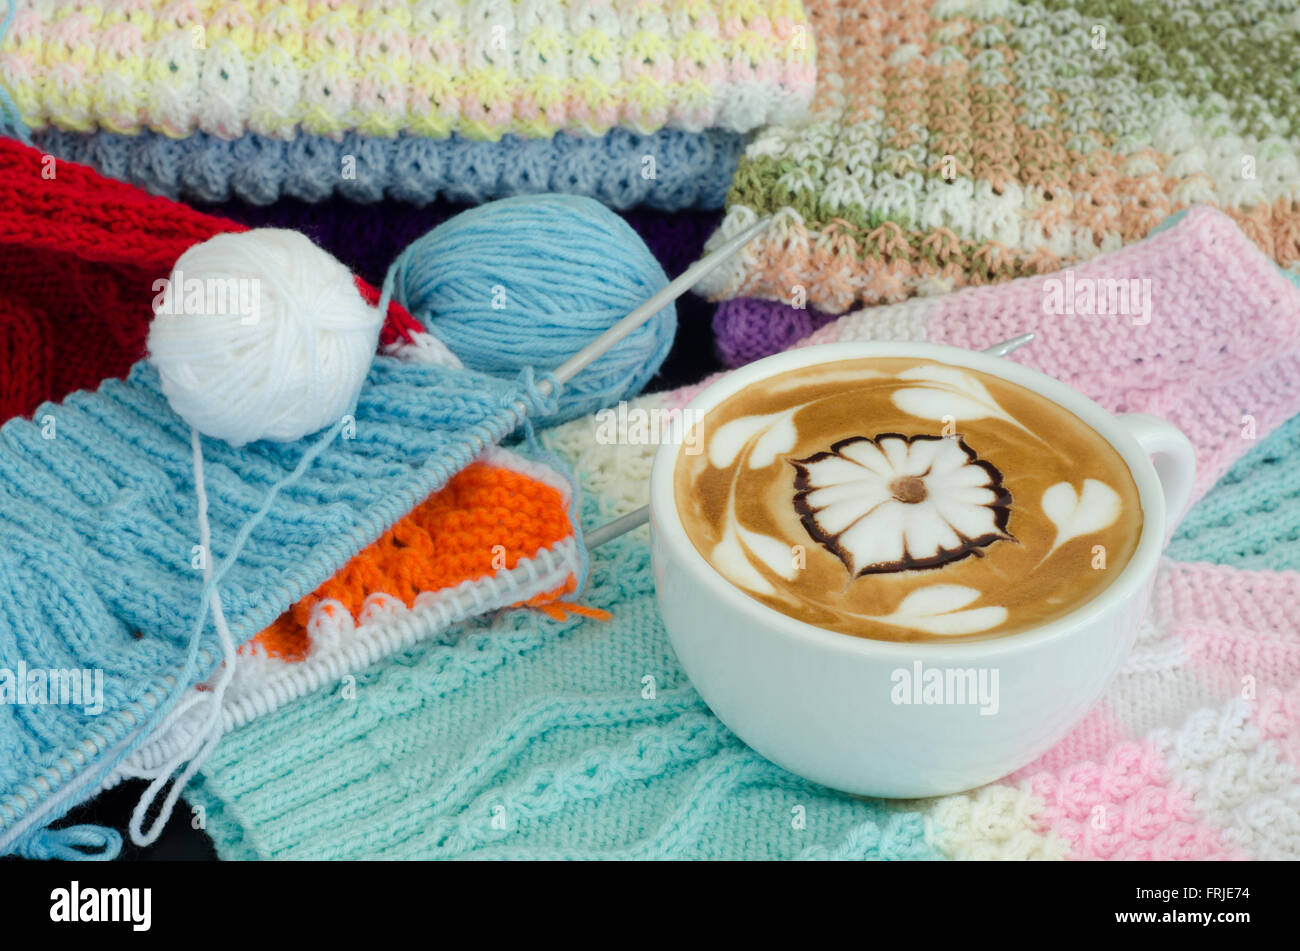 A cup of latte art on a knitted vest background Stock Photo